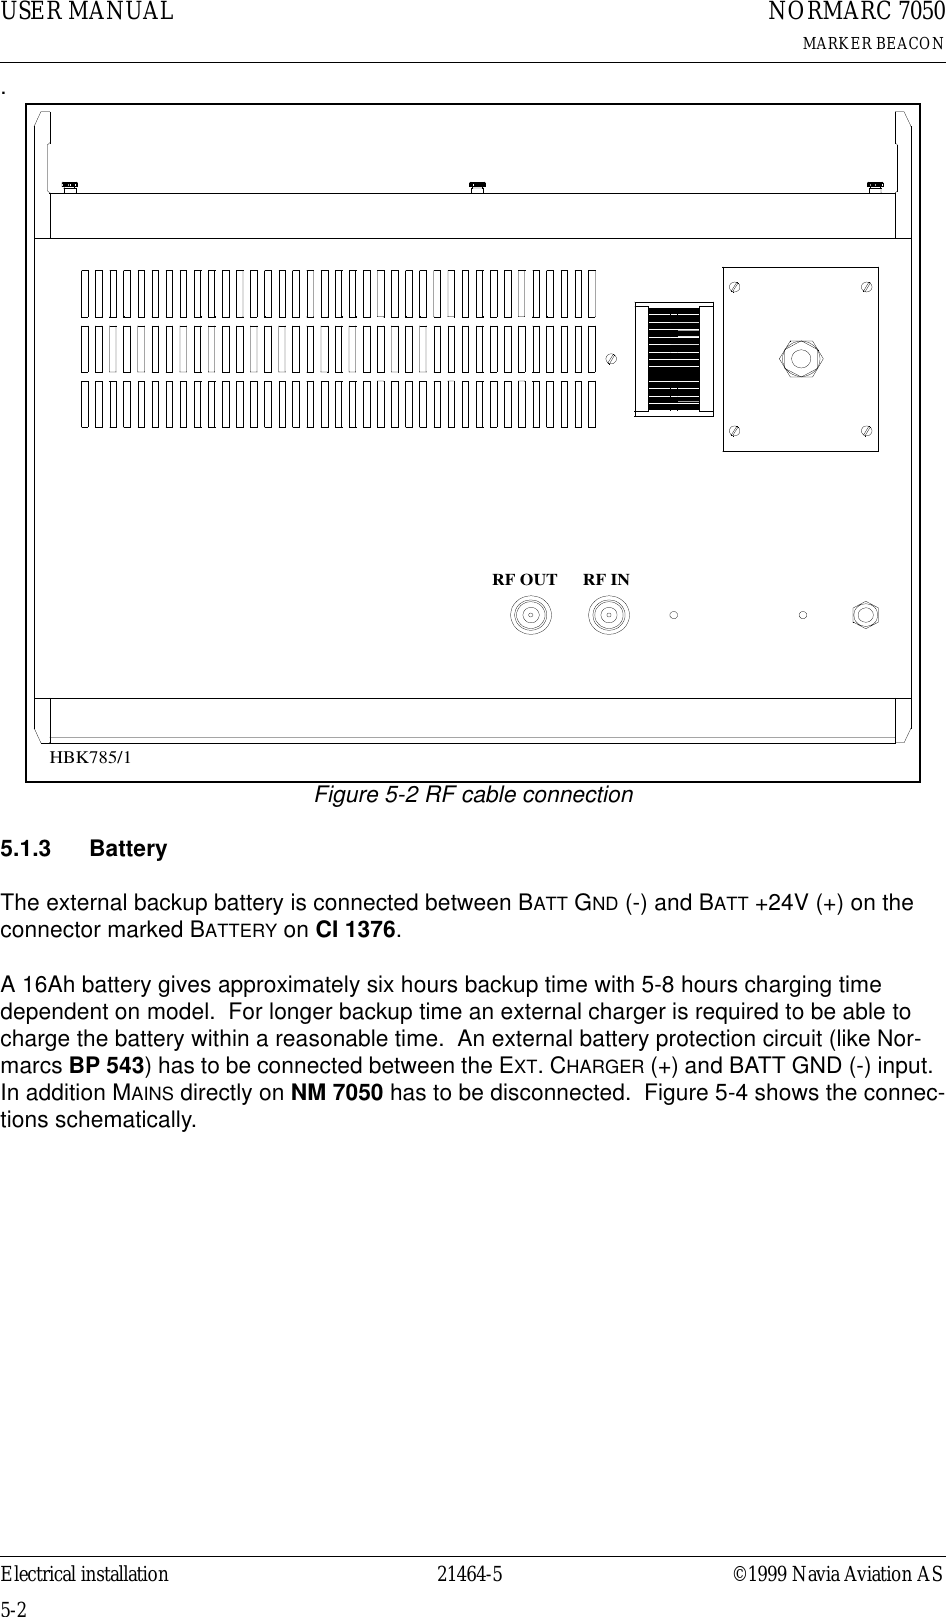 USER MANUAL5-221464-5NORMARC 7050MARKER BEACONElectrical installation ©1999 Navia Aviation AS.Figure 5-2 RF cable connection5.1.3 BatteryThe external backup battery is connected between BATT GND (-) and BATT +24V (+) on the connector marked BATTERY on CI 1376.  A 16Ah battery gives approximately six hours backup time with 5-8 hours charging time dependent on model.  For longer backup time an external charger is required to be able to charge the battery within a reasonable time.  An external battery protection circuit (like Nor-marcs BP 543) has to be connected between the EXT. CHARGER (+) and BATT GND (-) input.  In addition MAINS directly on NM 7050 has to be disconnected.  Figure 5-4 shows the connec-tions schematically.RF OUT RF INHBK785/1